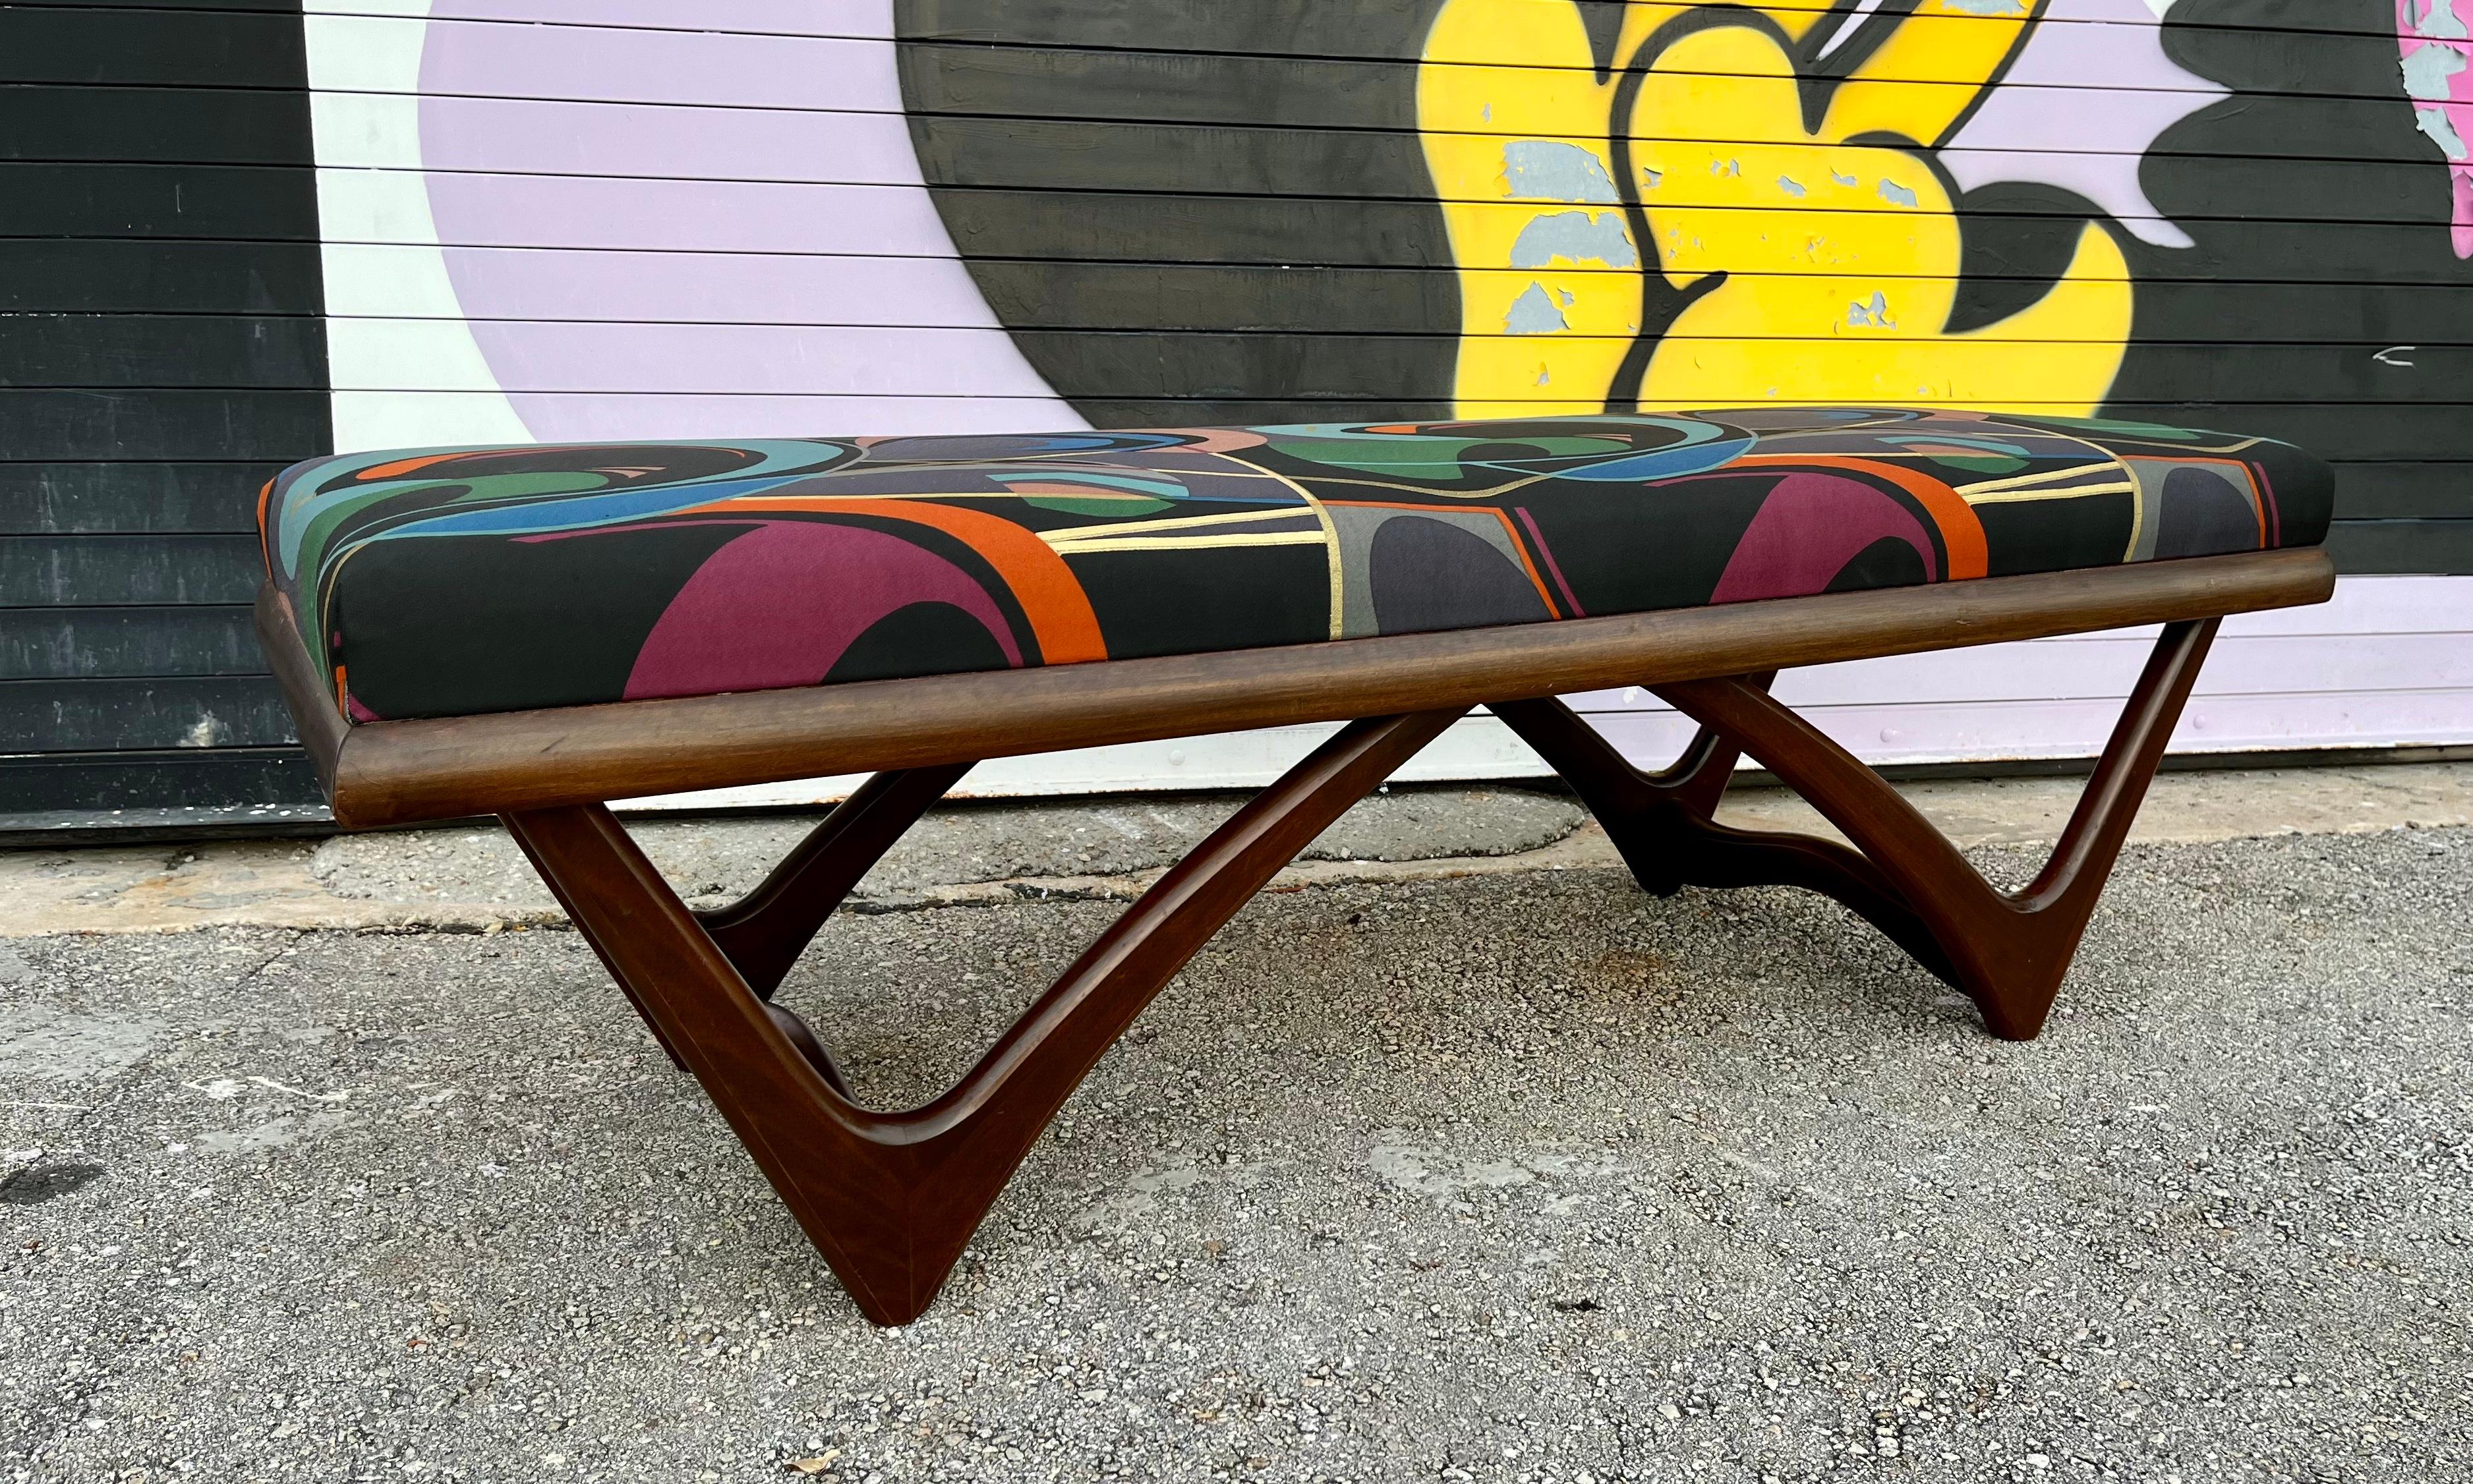 Mid-Century Modern Sculptural Bench in the Adrian Pearsall Style. Circa 1960s.
Features a dark walnut toned wood base with boomerang shaped legs and a newly reupholstered cushion with a vintage optical print fabric. 
In excellent original condition